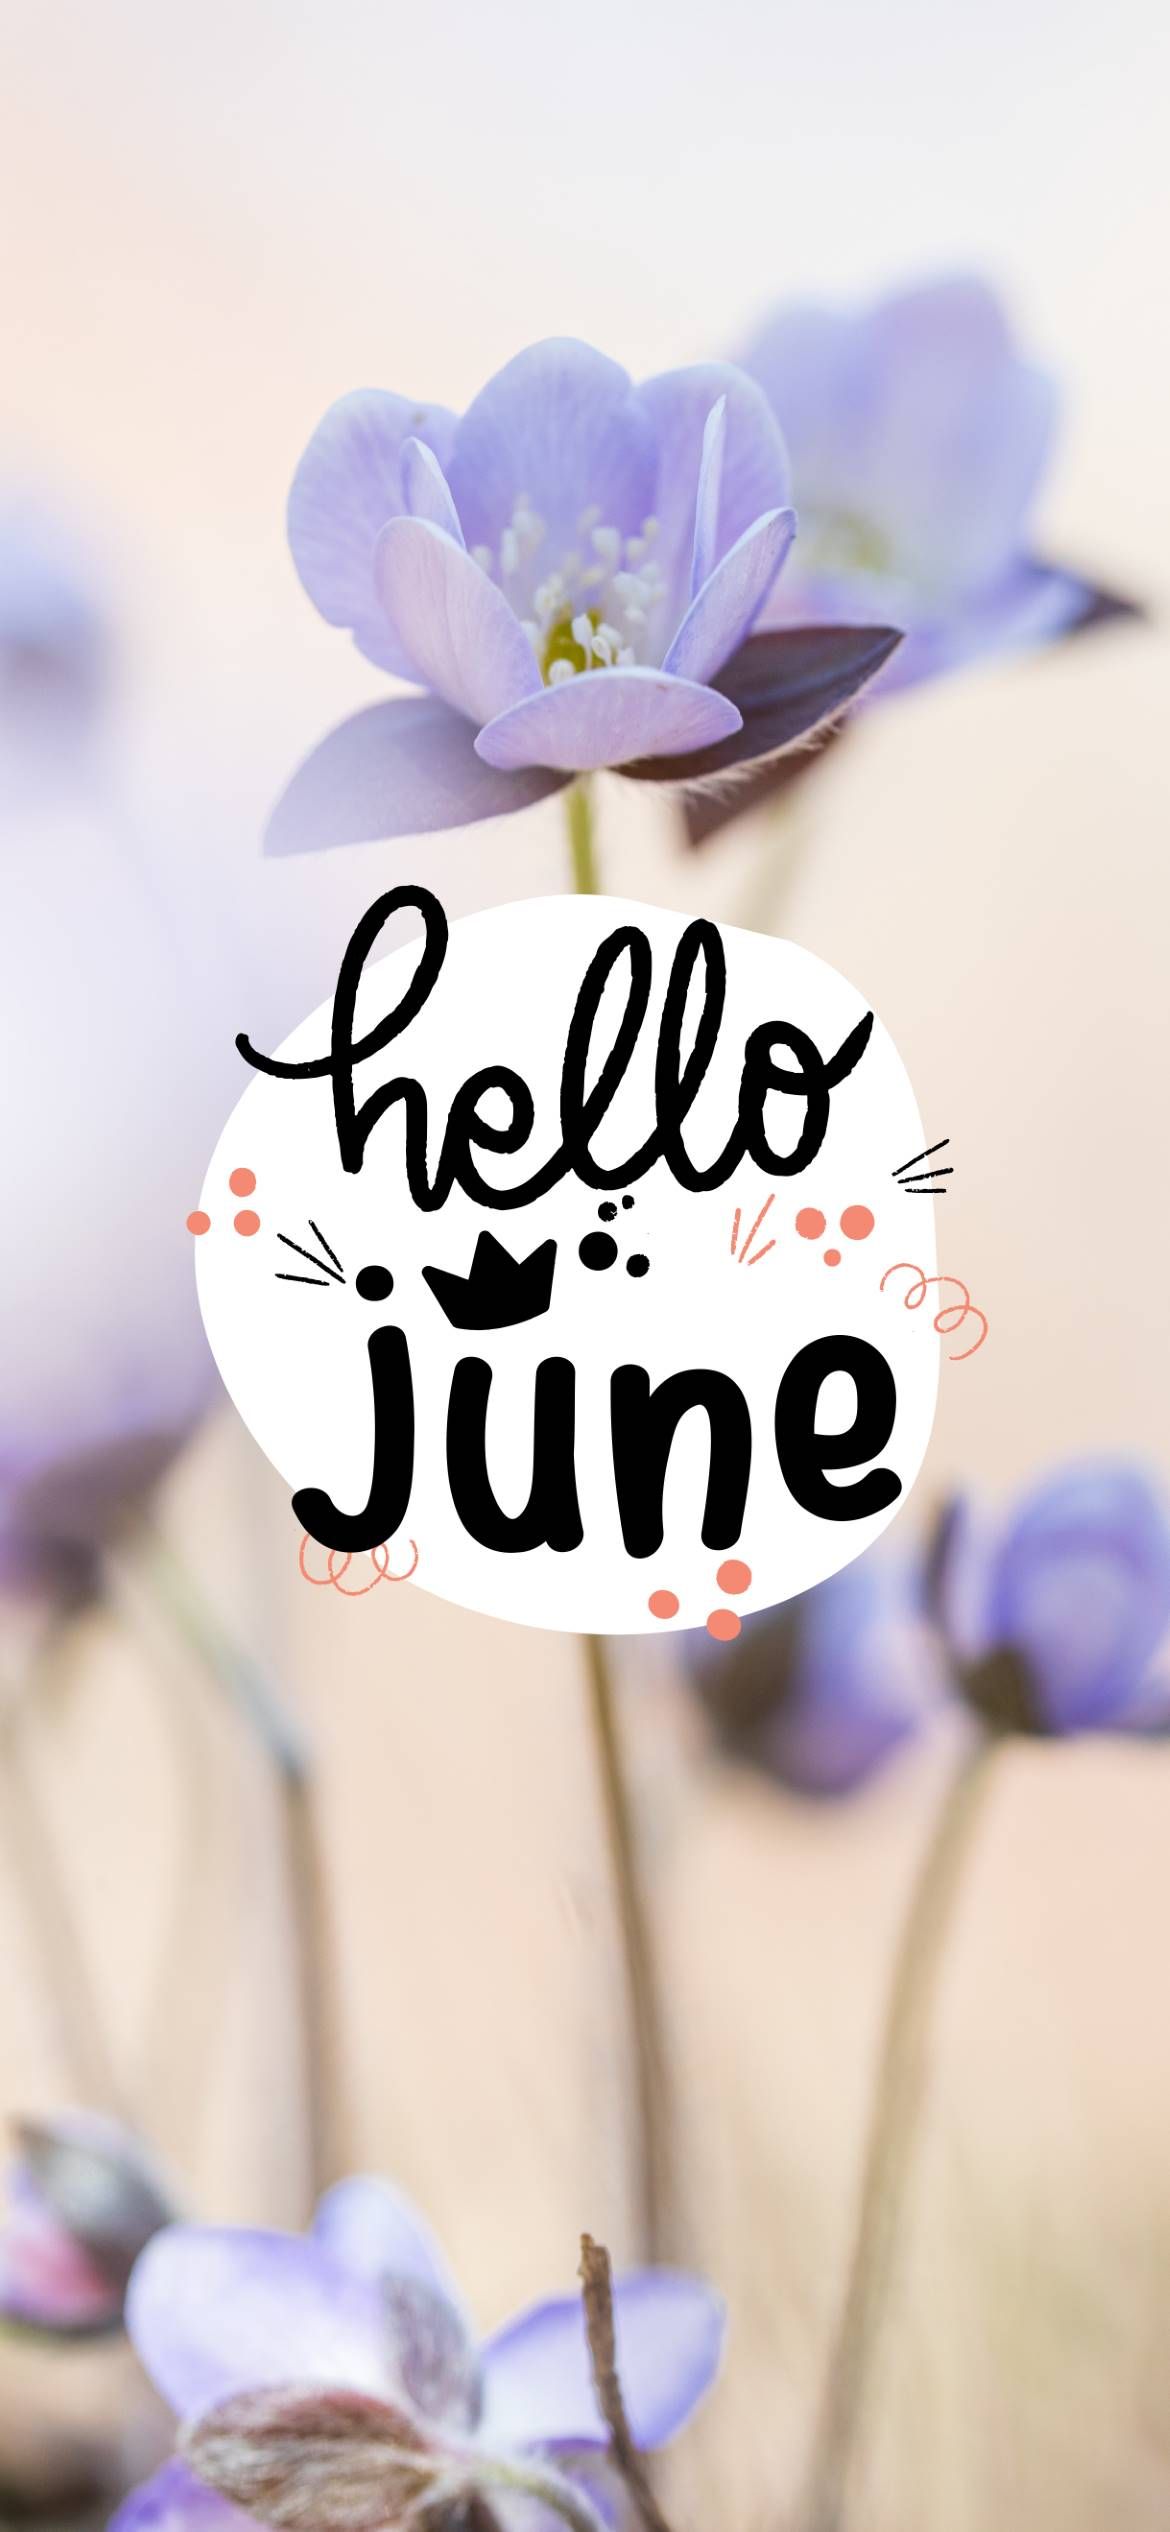 Hello June wallpaper for your phone. iPhone and Android. - April, June